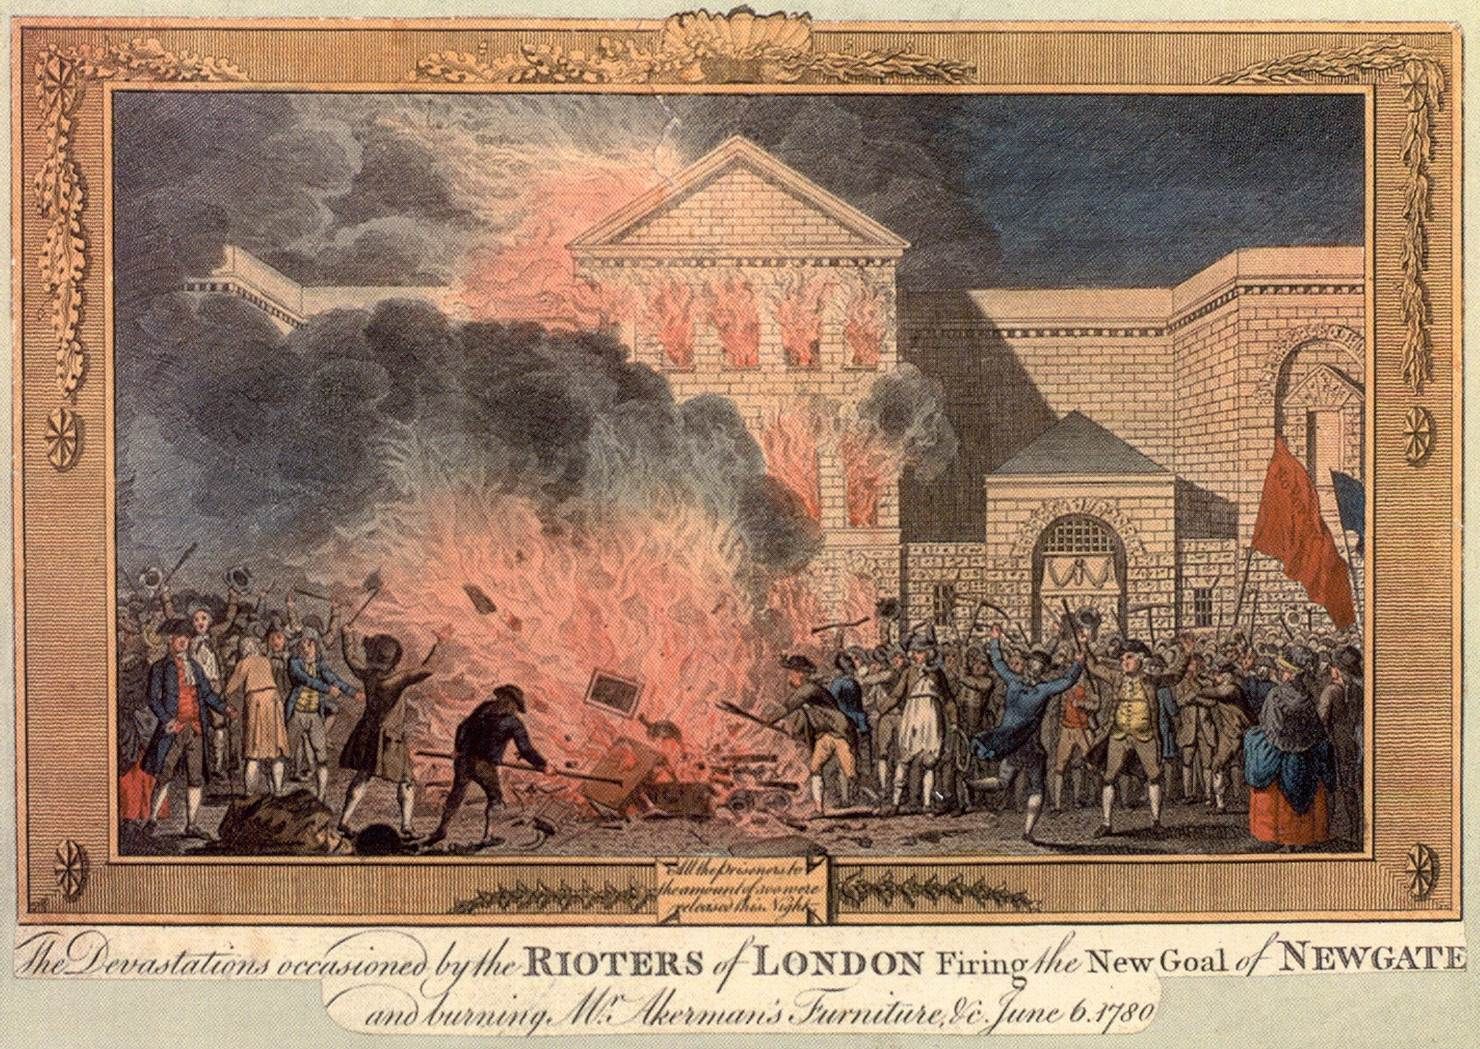 Figure 7.5: *The devastations occasioned by the rioters of London firing the new goal of Newgate ... June 6, 1780*. © London Metropolitan Archives, ref. SC/GL/PR/446/OLD/2/q8038930.